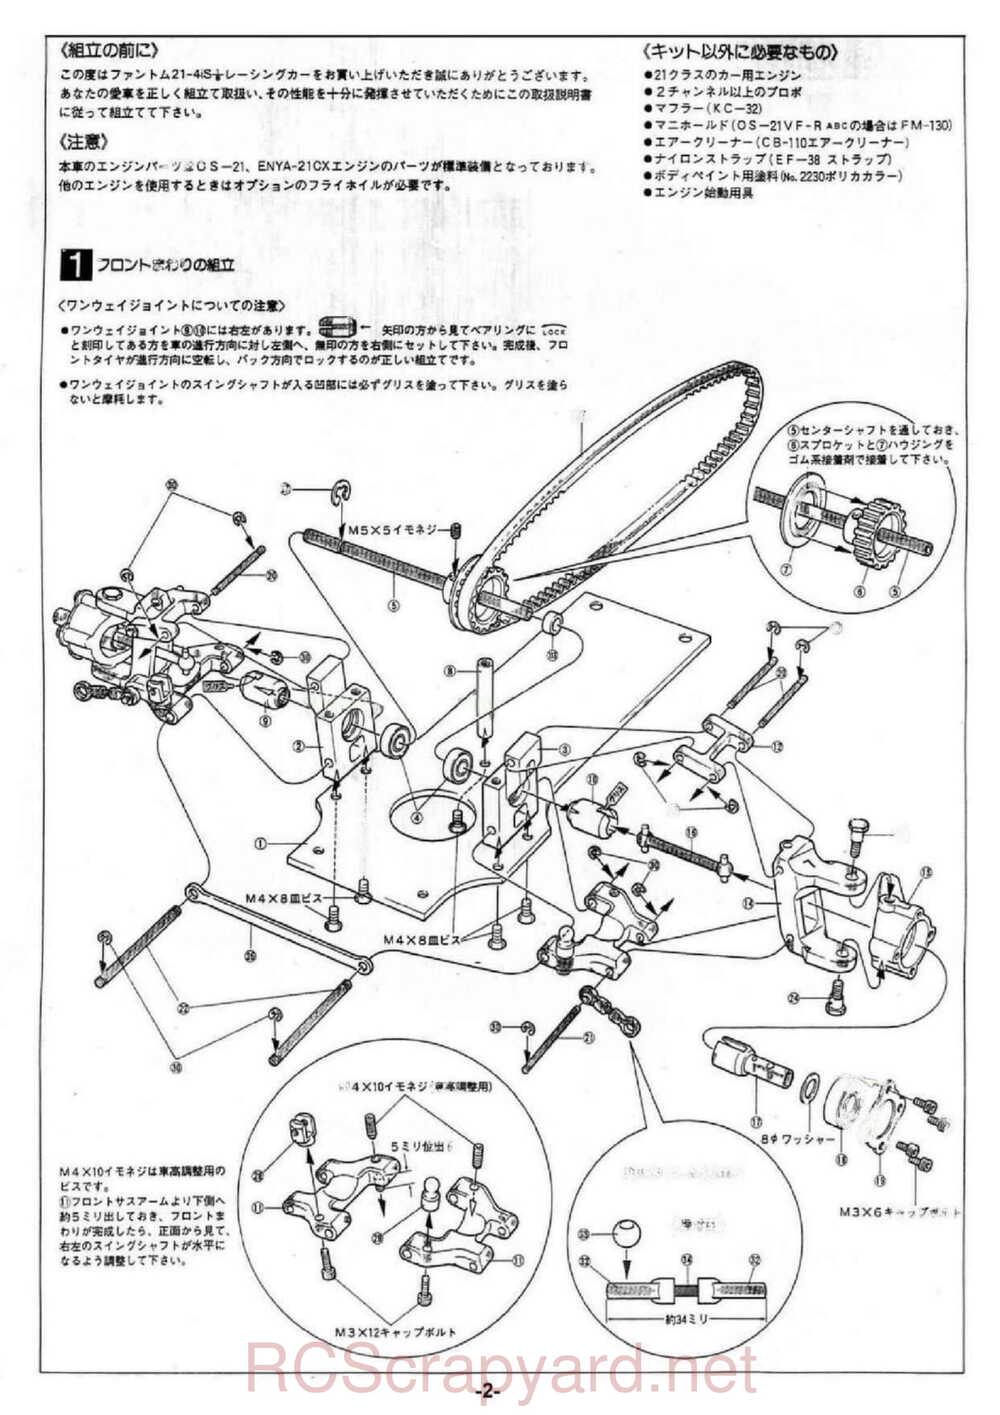 Kyosho - 3121 - Fantom-21 4iS - Manual - Page 02